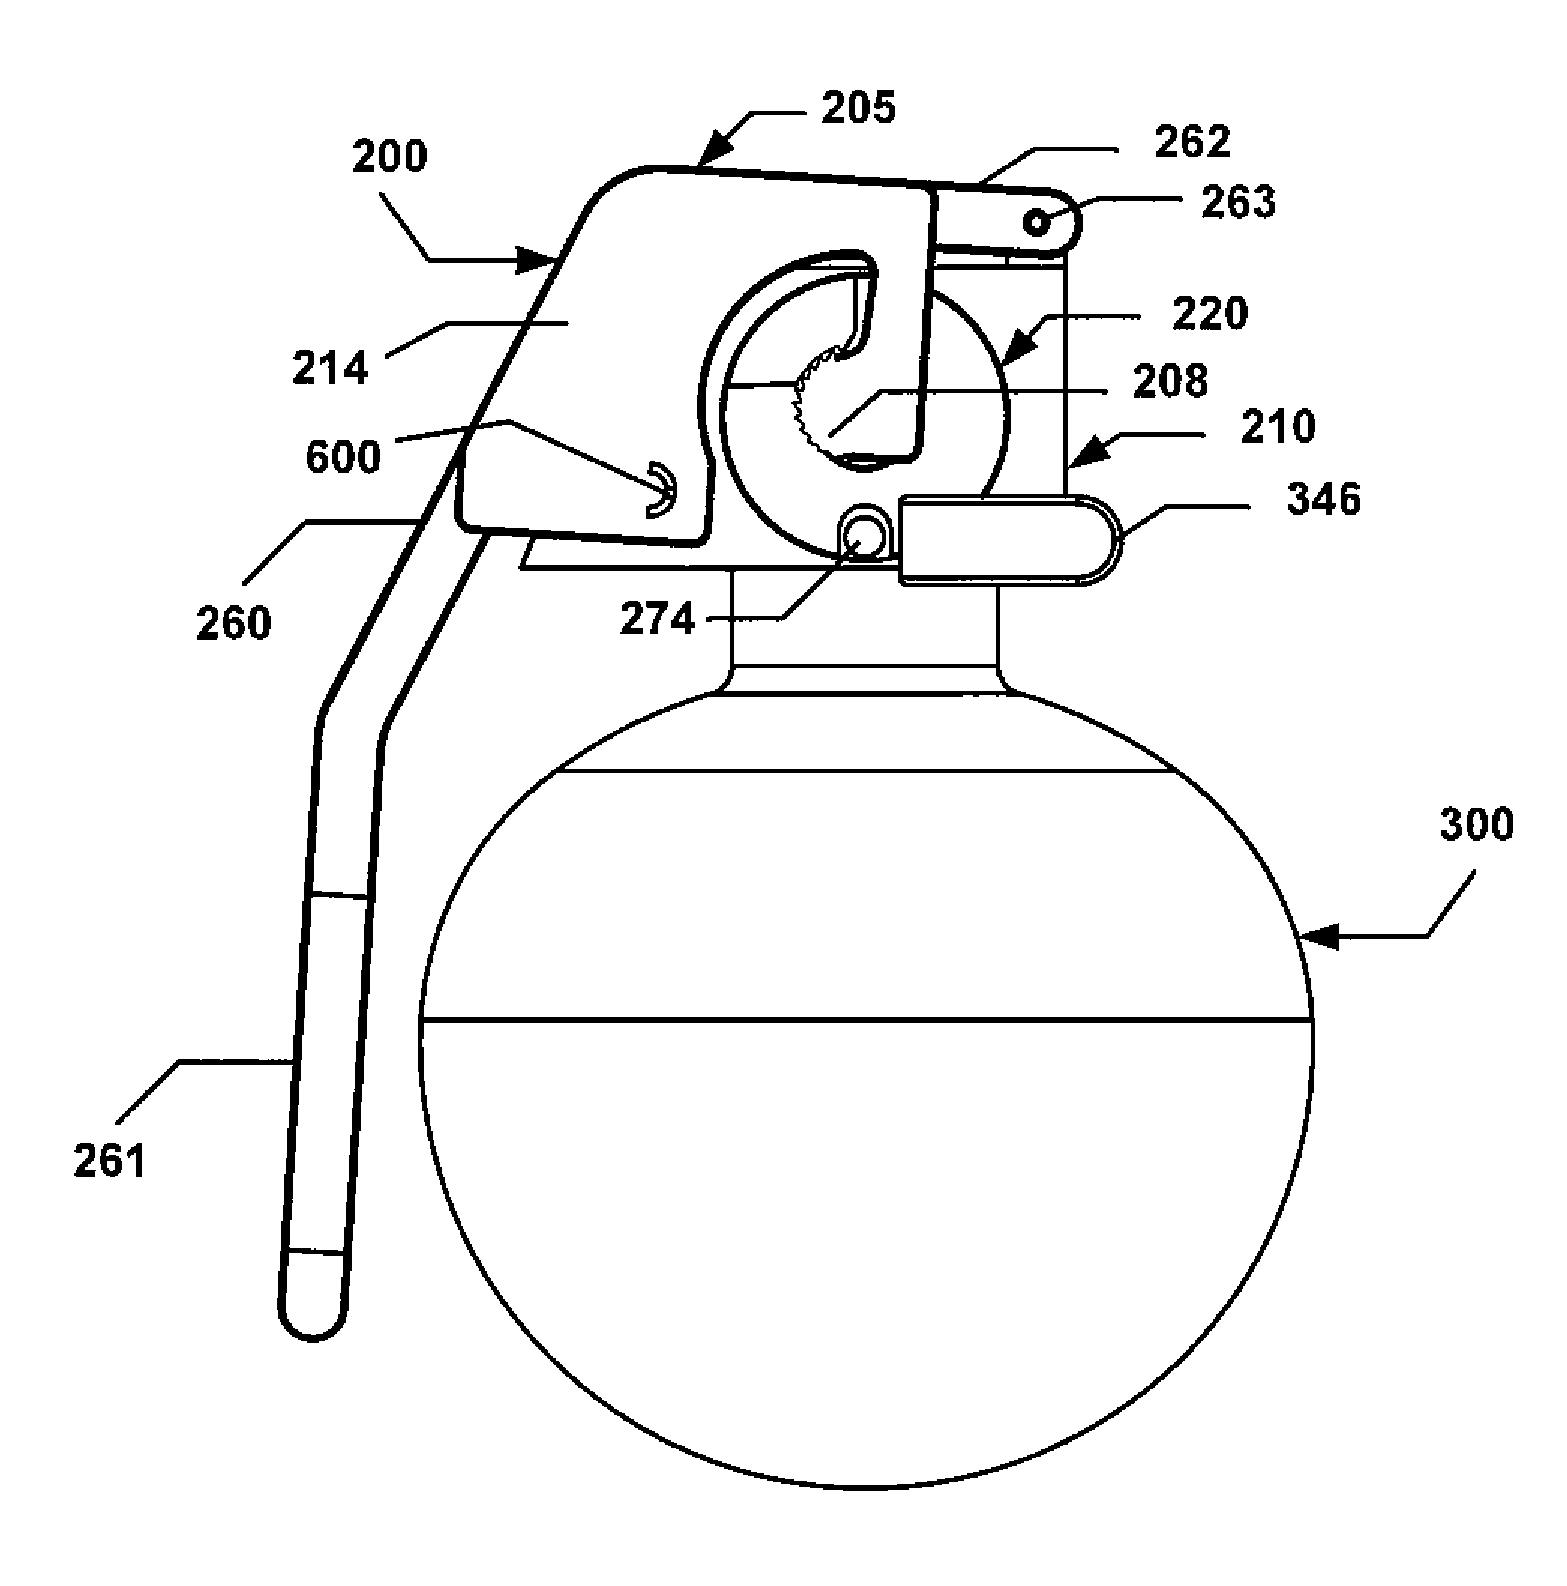 Rotating thumb safety fuze for a hand grenade and related methods of operation and assembly